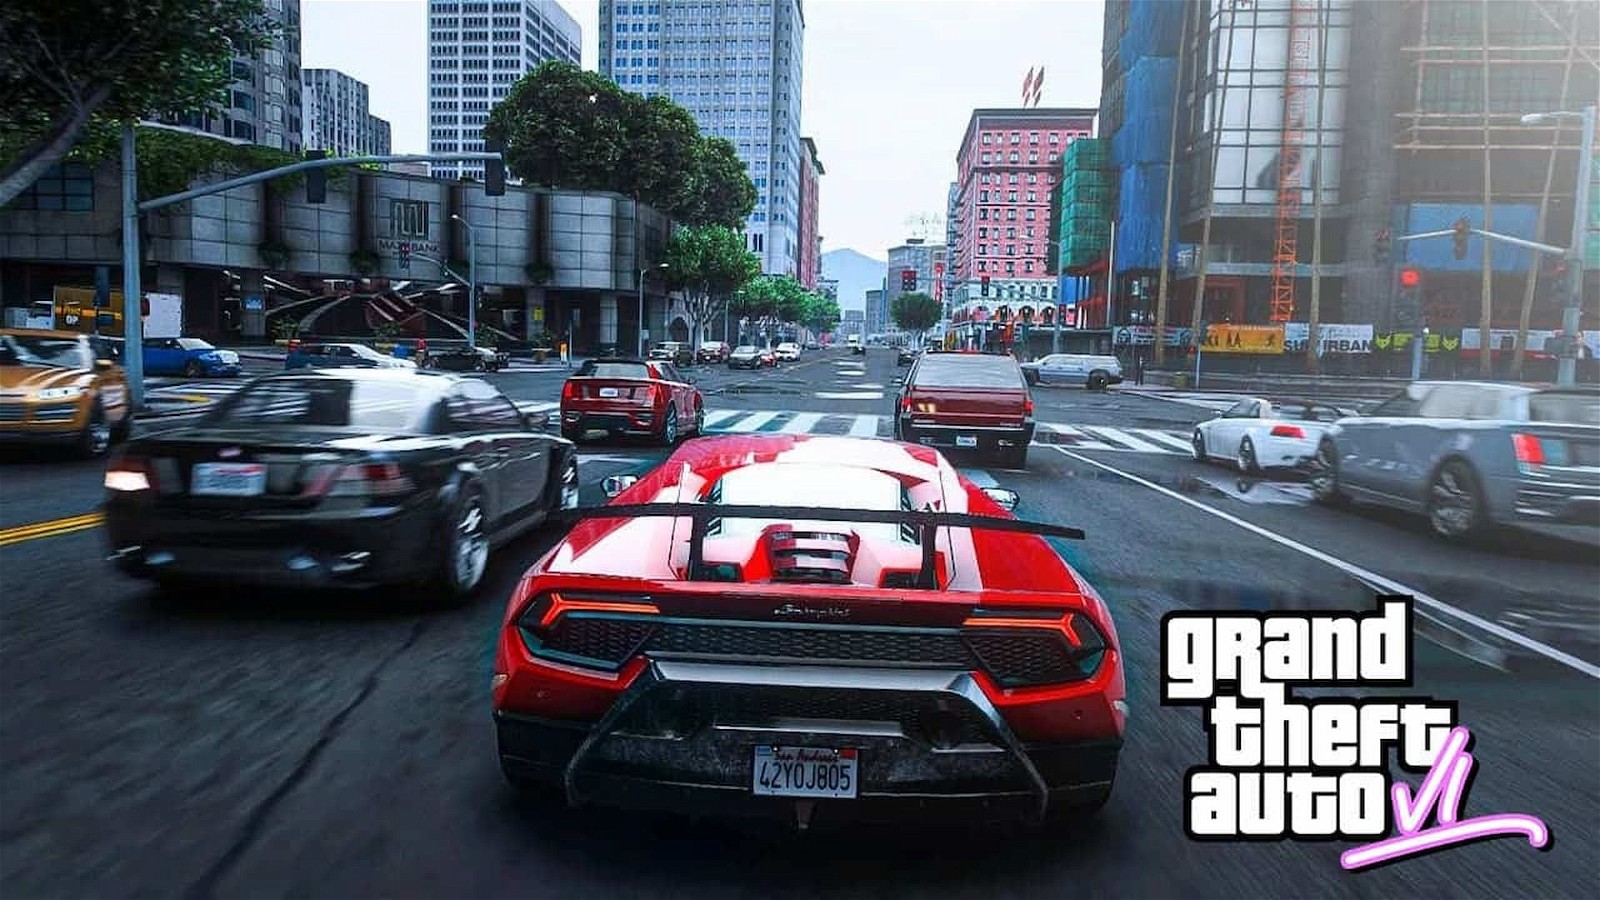 Industry insider reports that GTA 6 preview campaign is underway